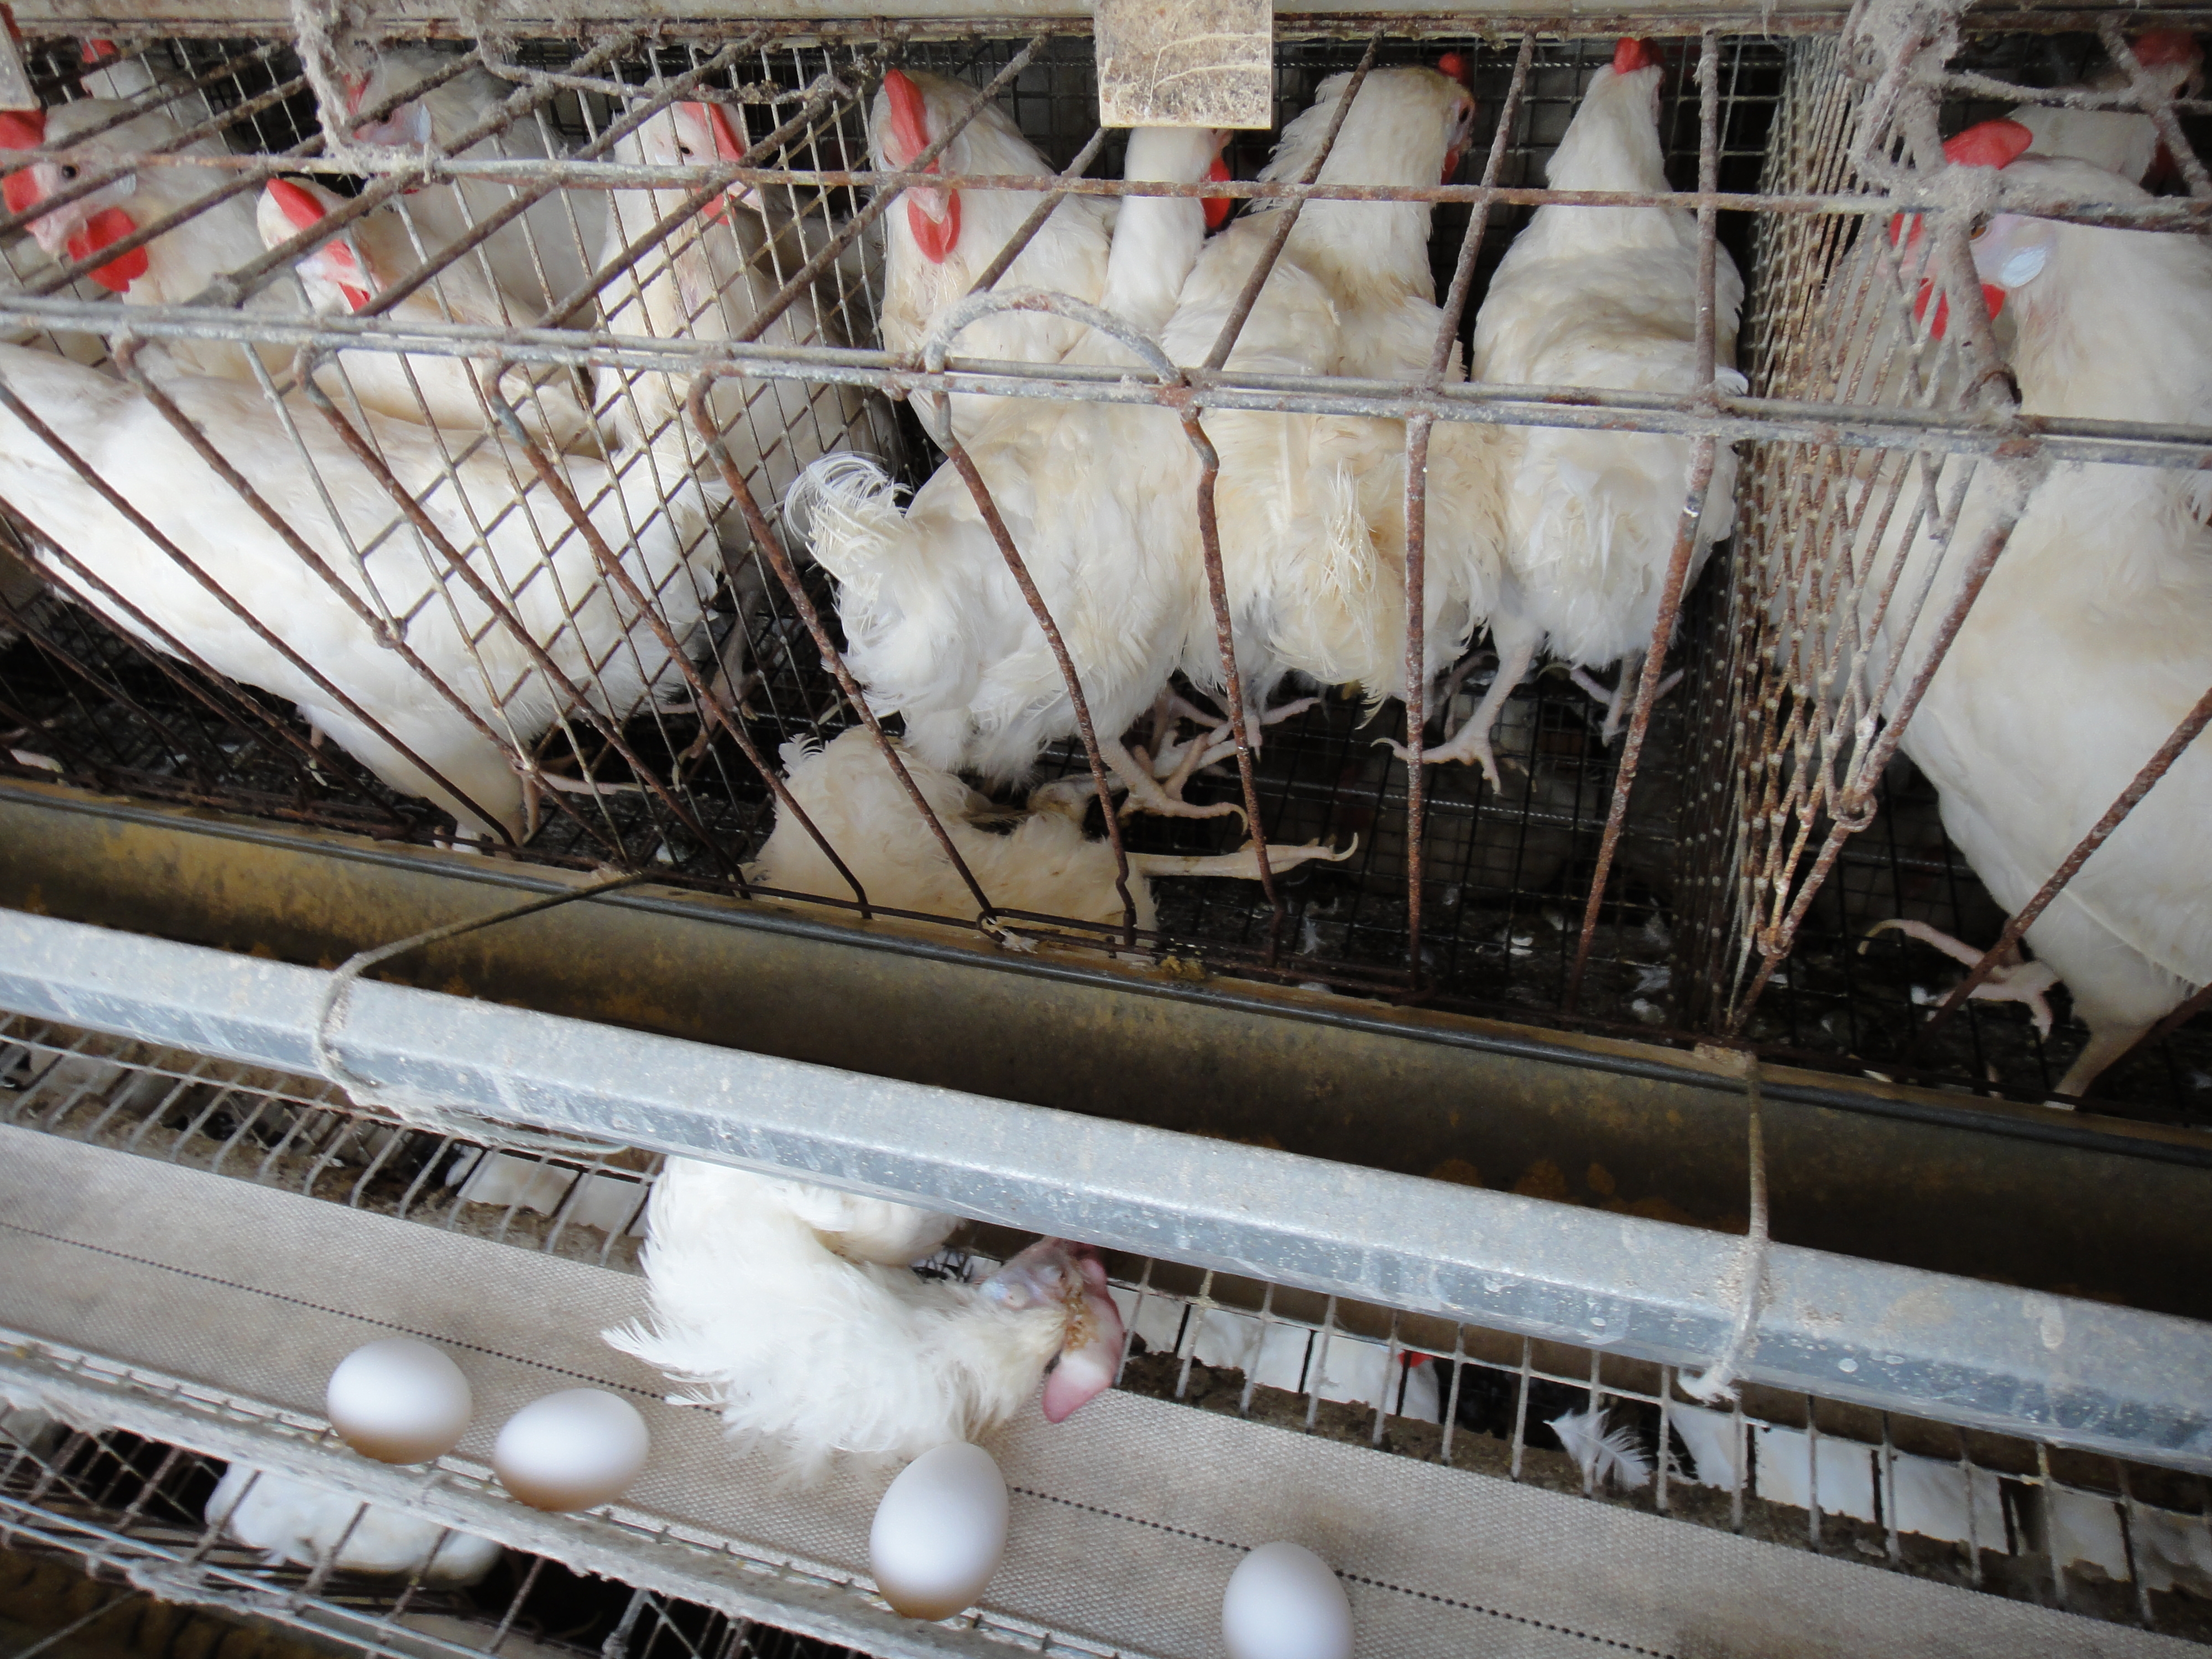 Chicken abuse alleged at largest egg producer